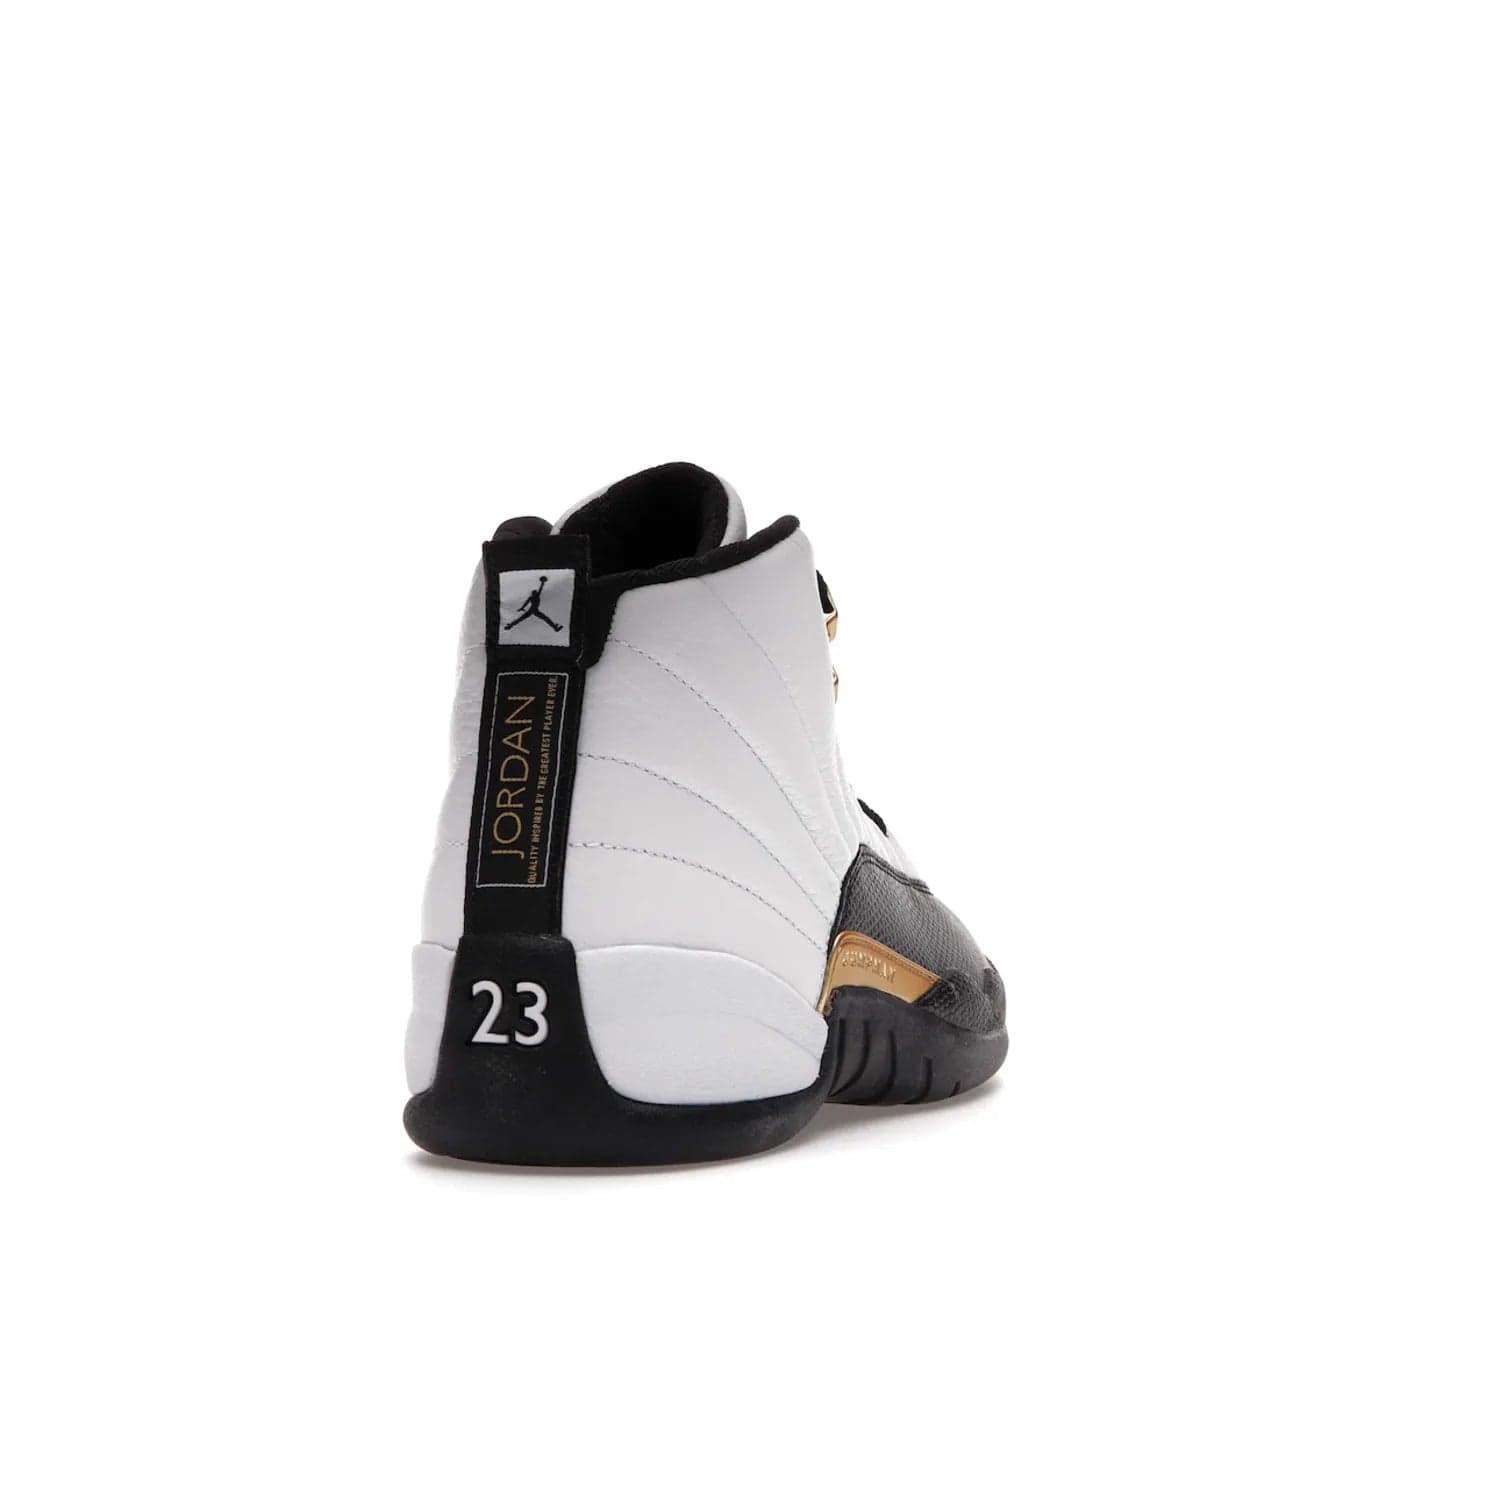 Jordan 12 Retro Royalty Taxi - Image 30 - Only at www.BallersClubKickz.com - Make a statement with the Air Jordan 12 Retro Royalty Taxi. Woven heel tag, gold plaquet, white tumbled leather upper plus a black toe wrap, make this modern take on the classic a must-have. Available in November 2021.